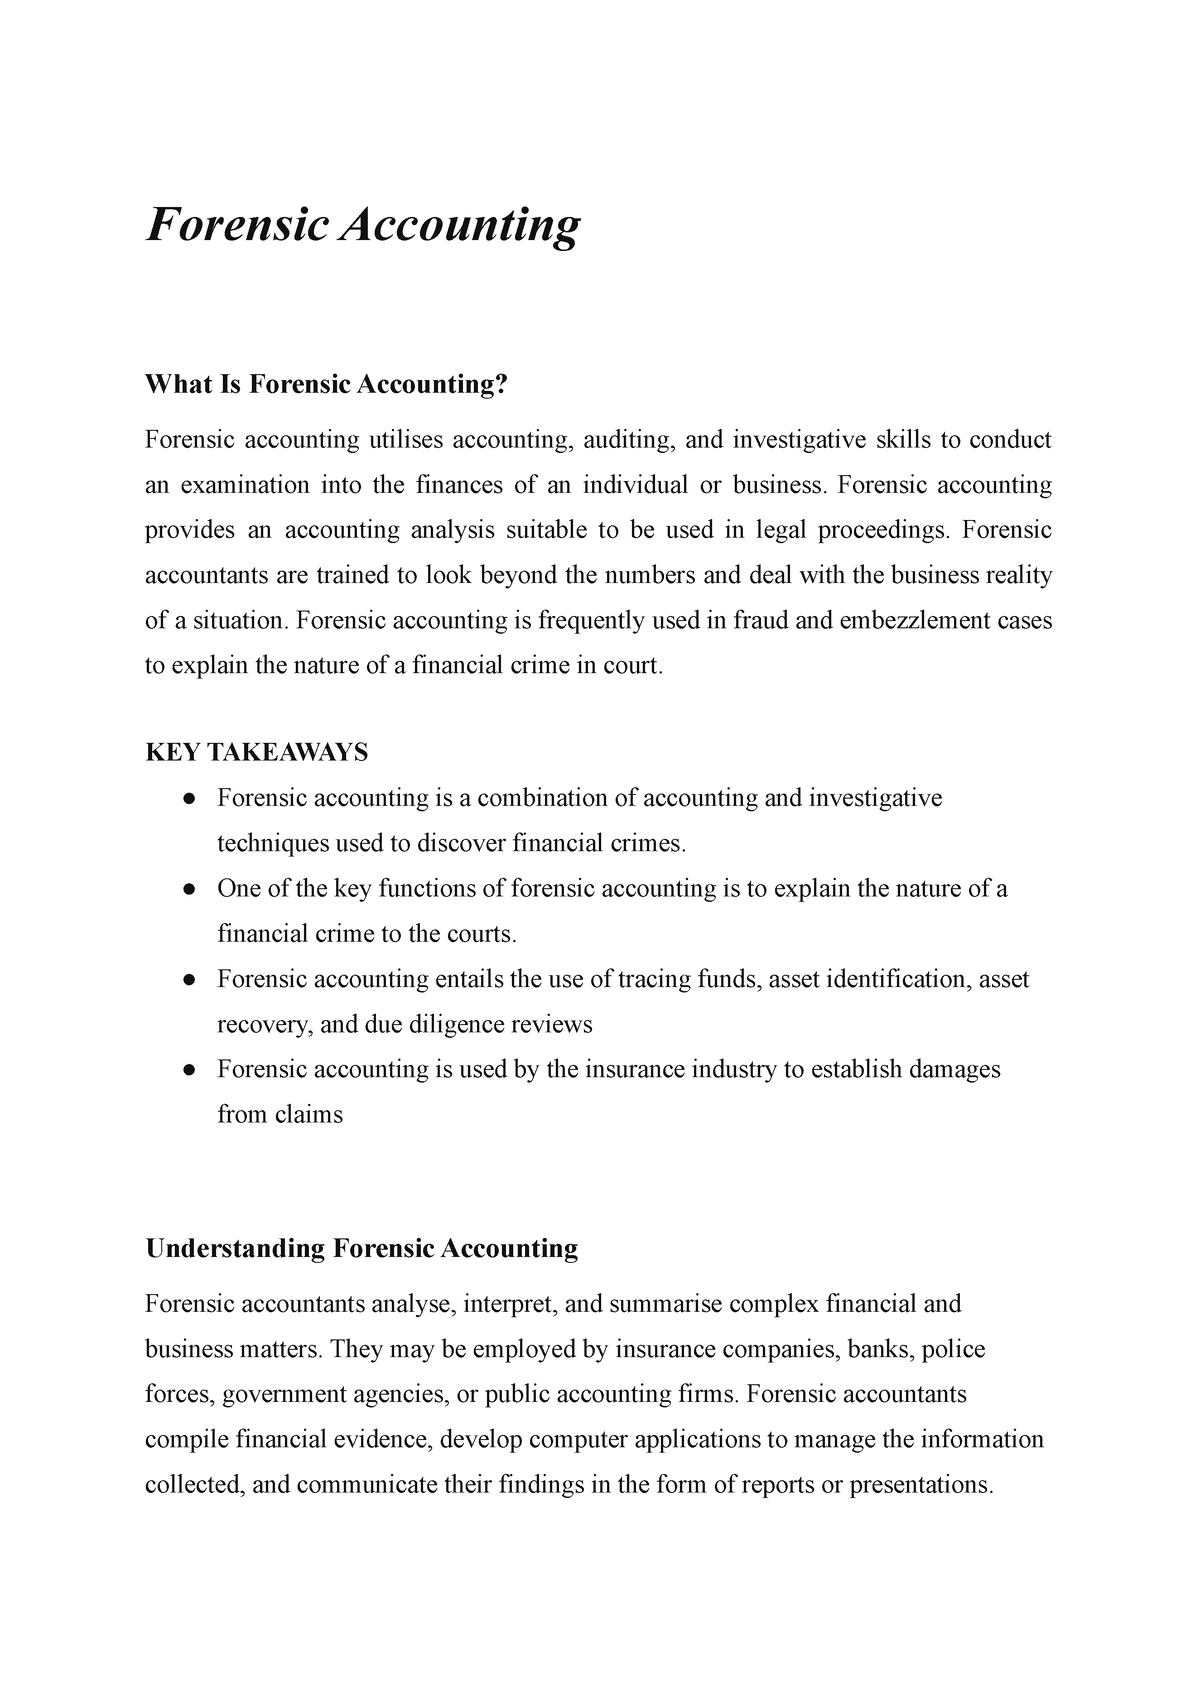 phd thesis on forensic accounting